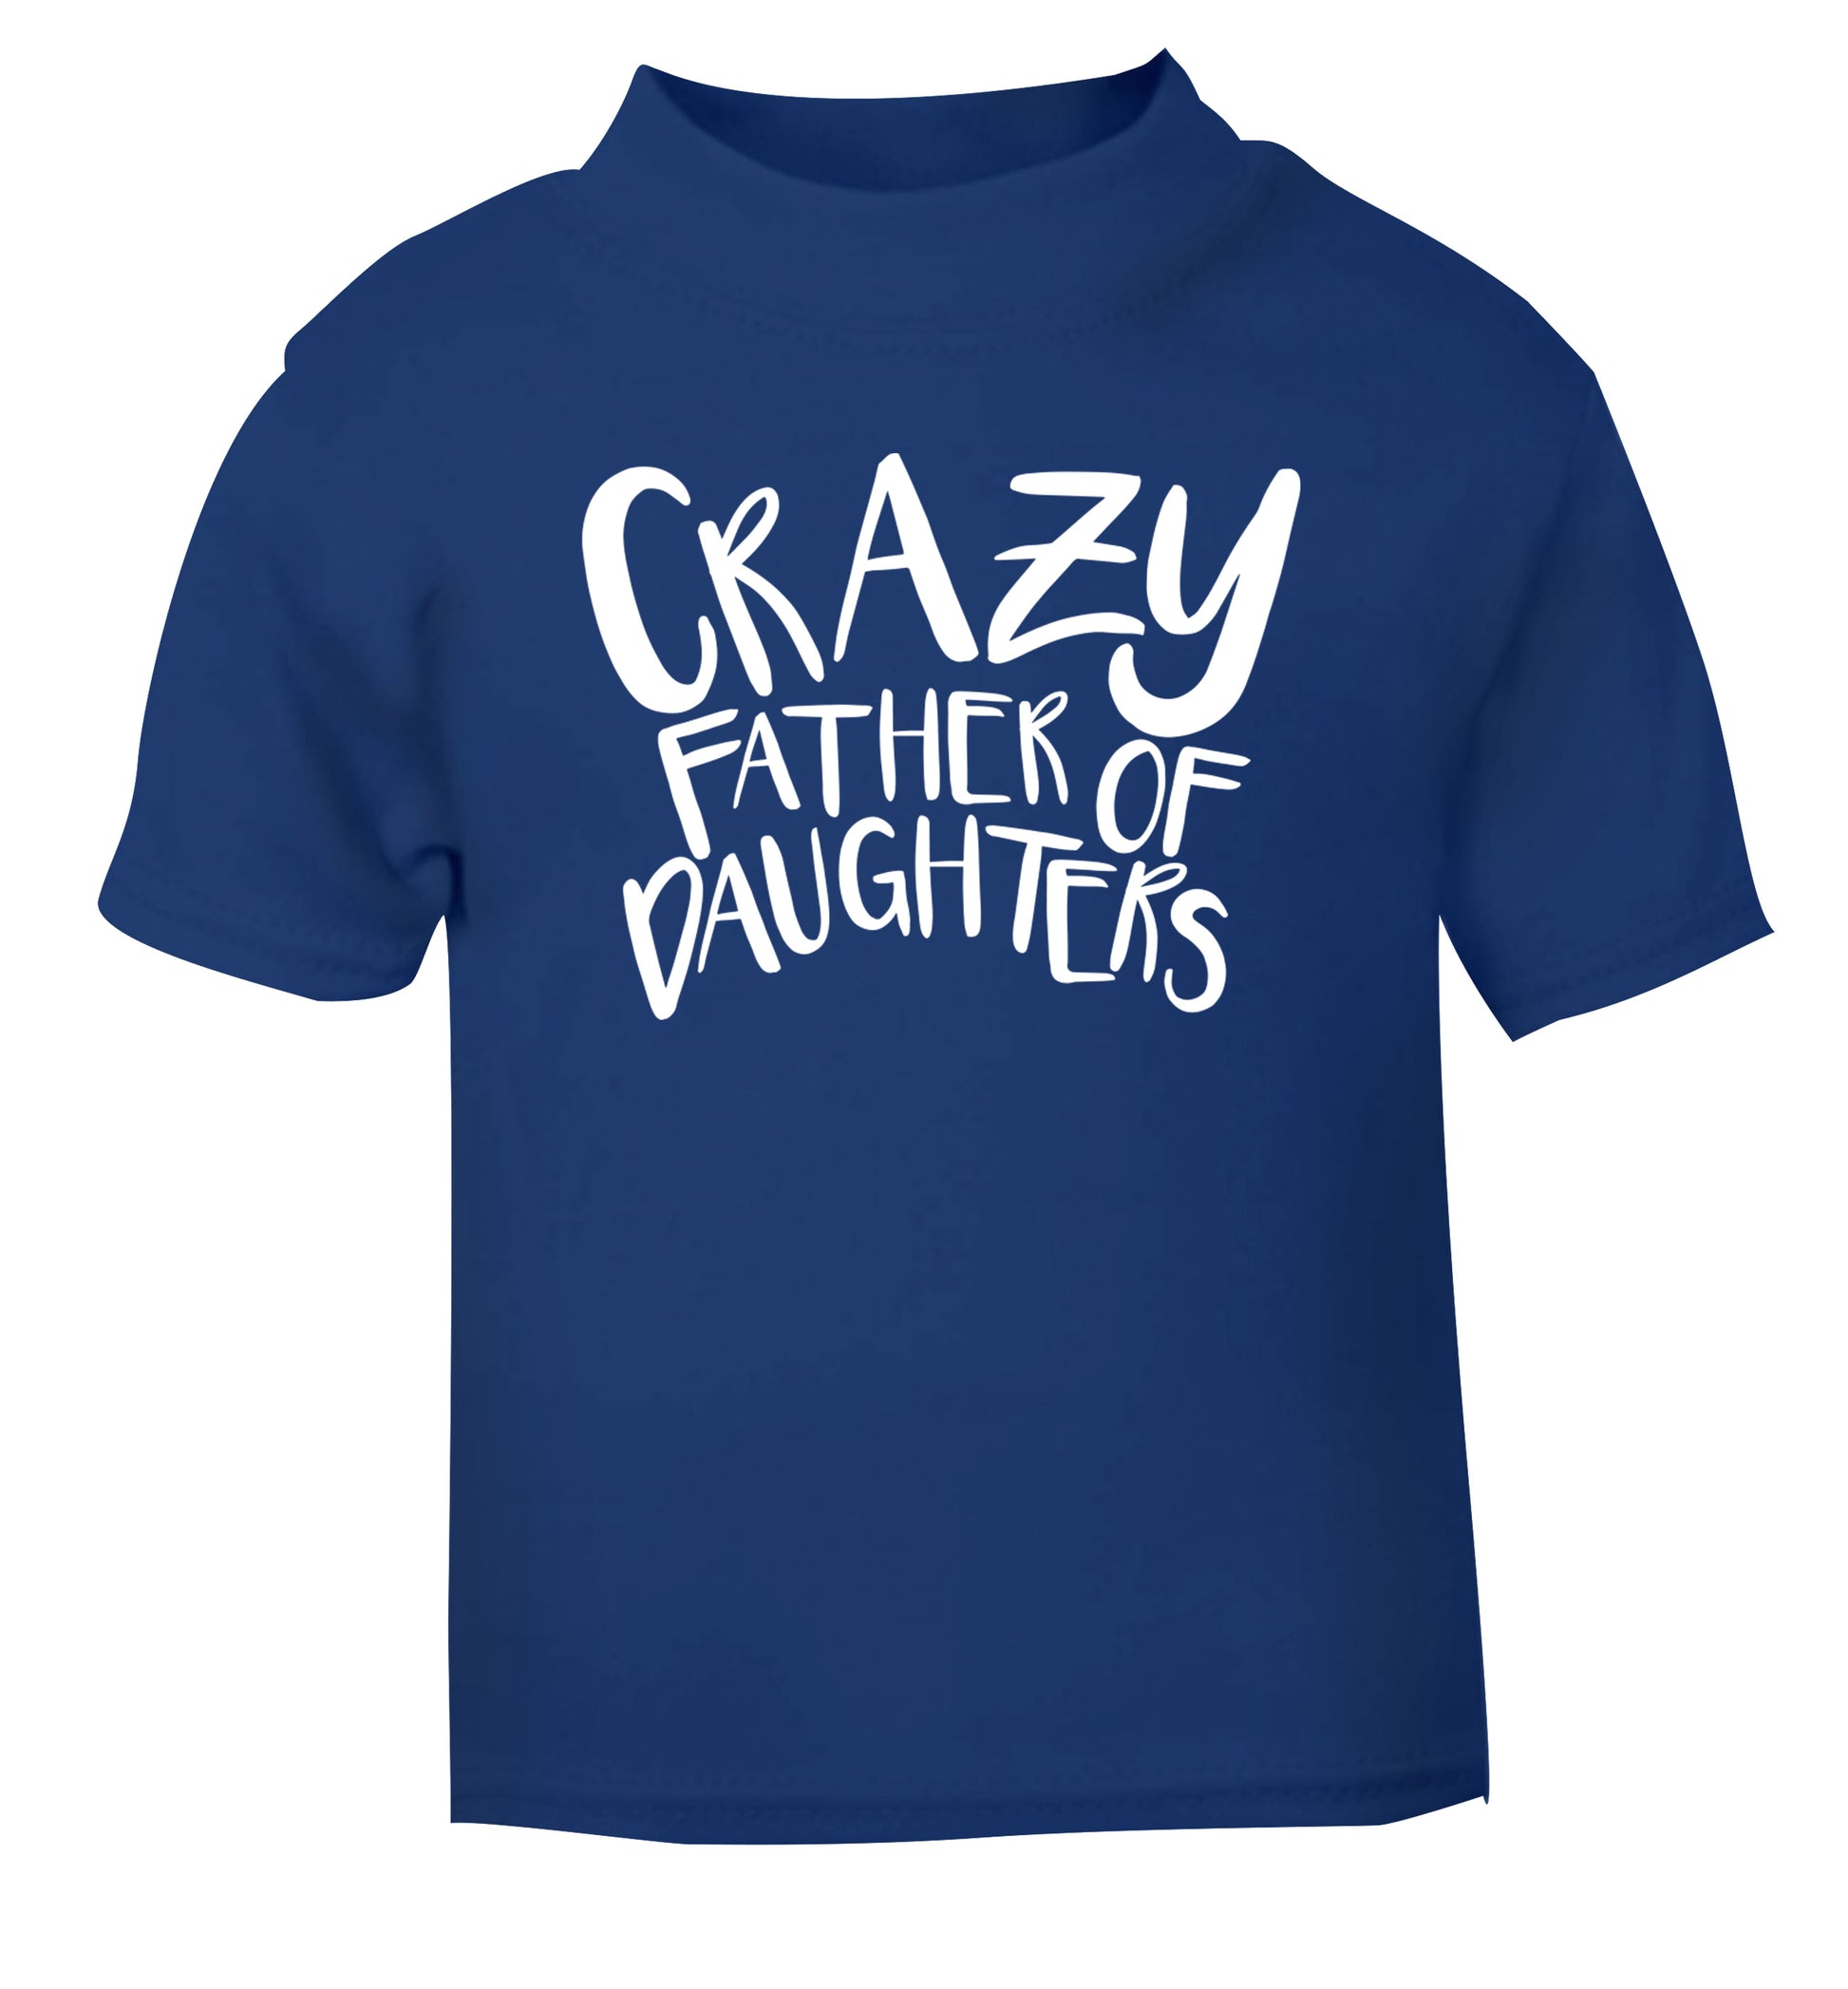 Crazy father of daughters blue Baby Toddler Tshirt 2 Years